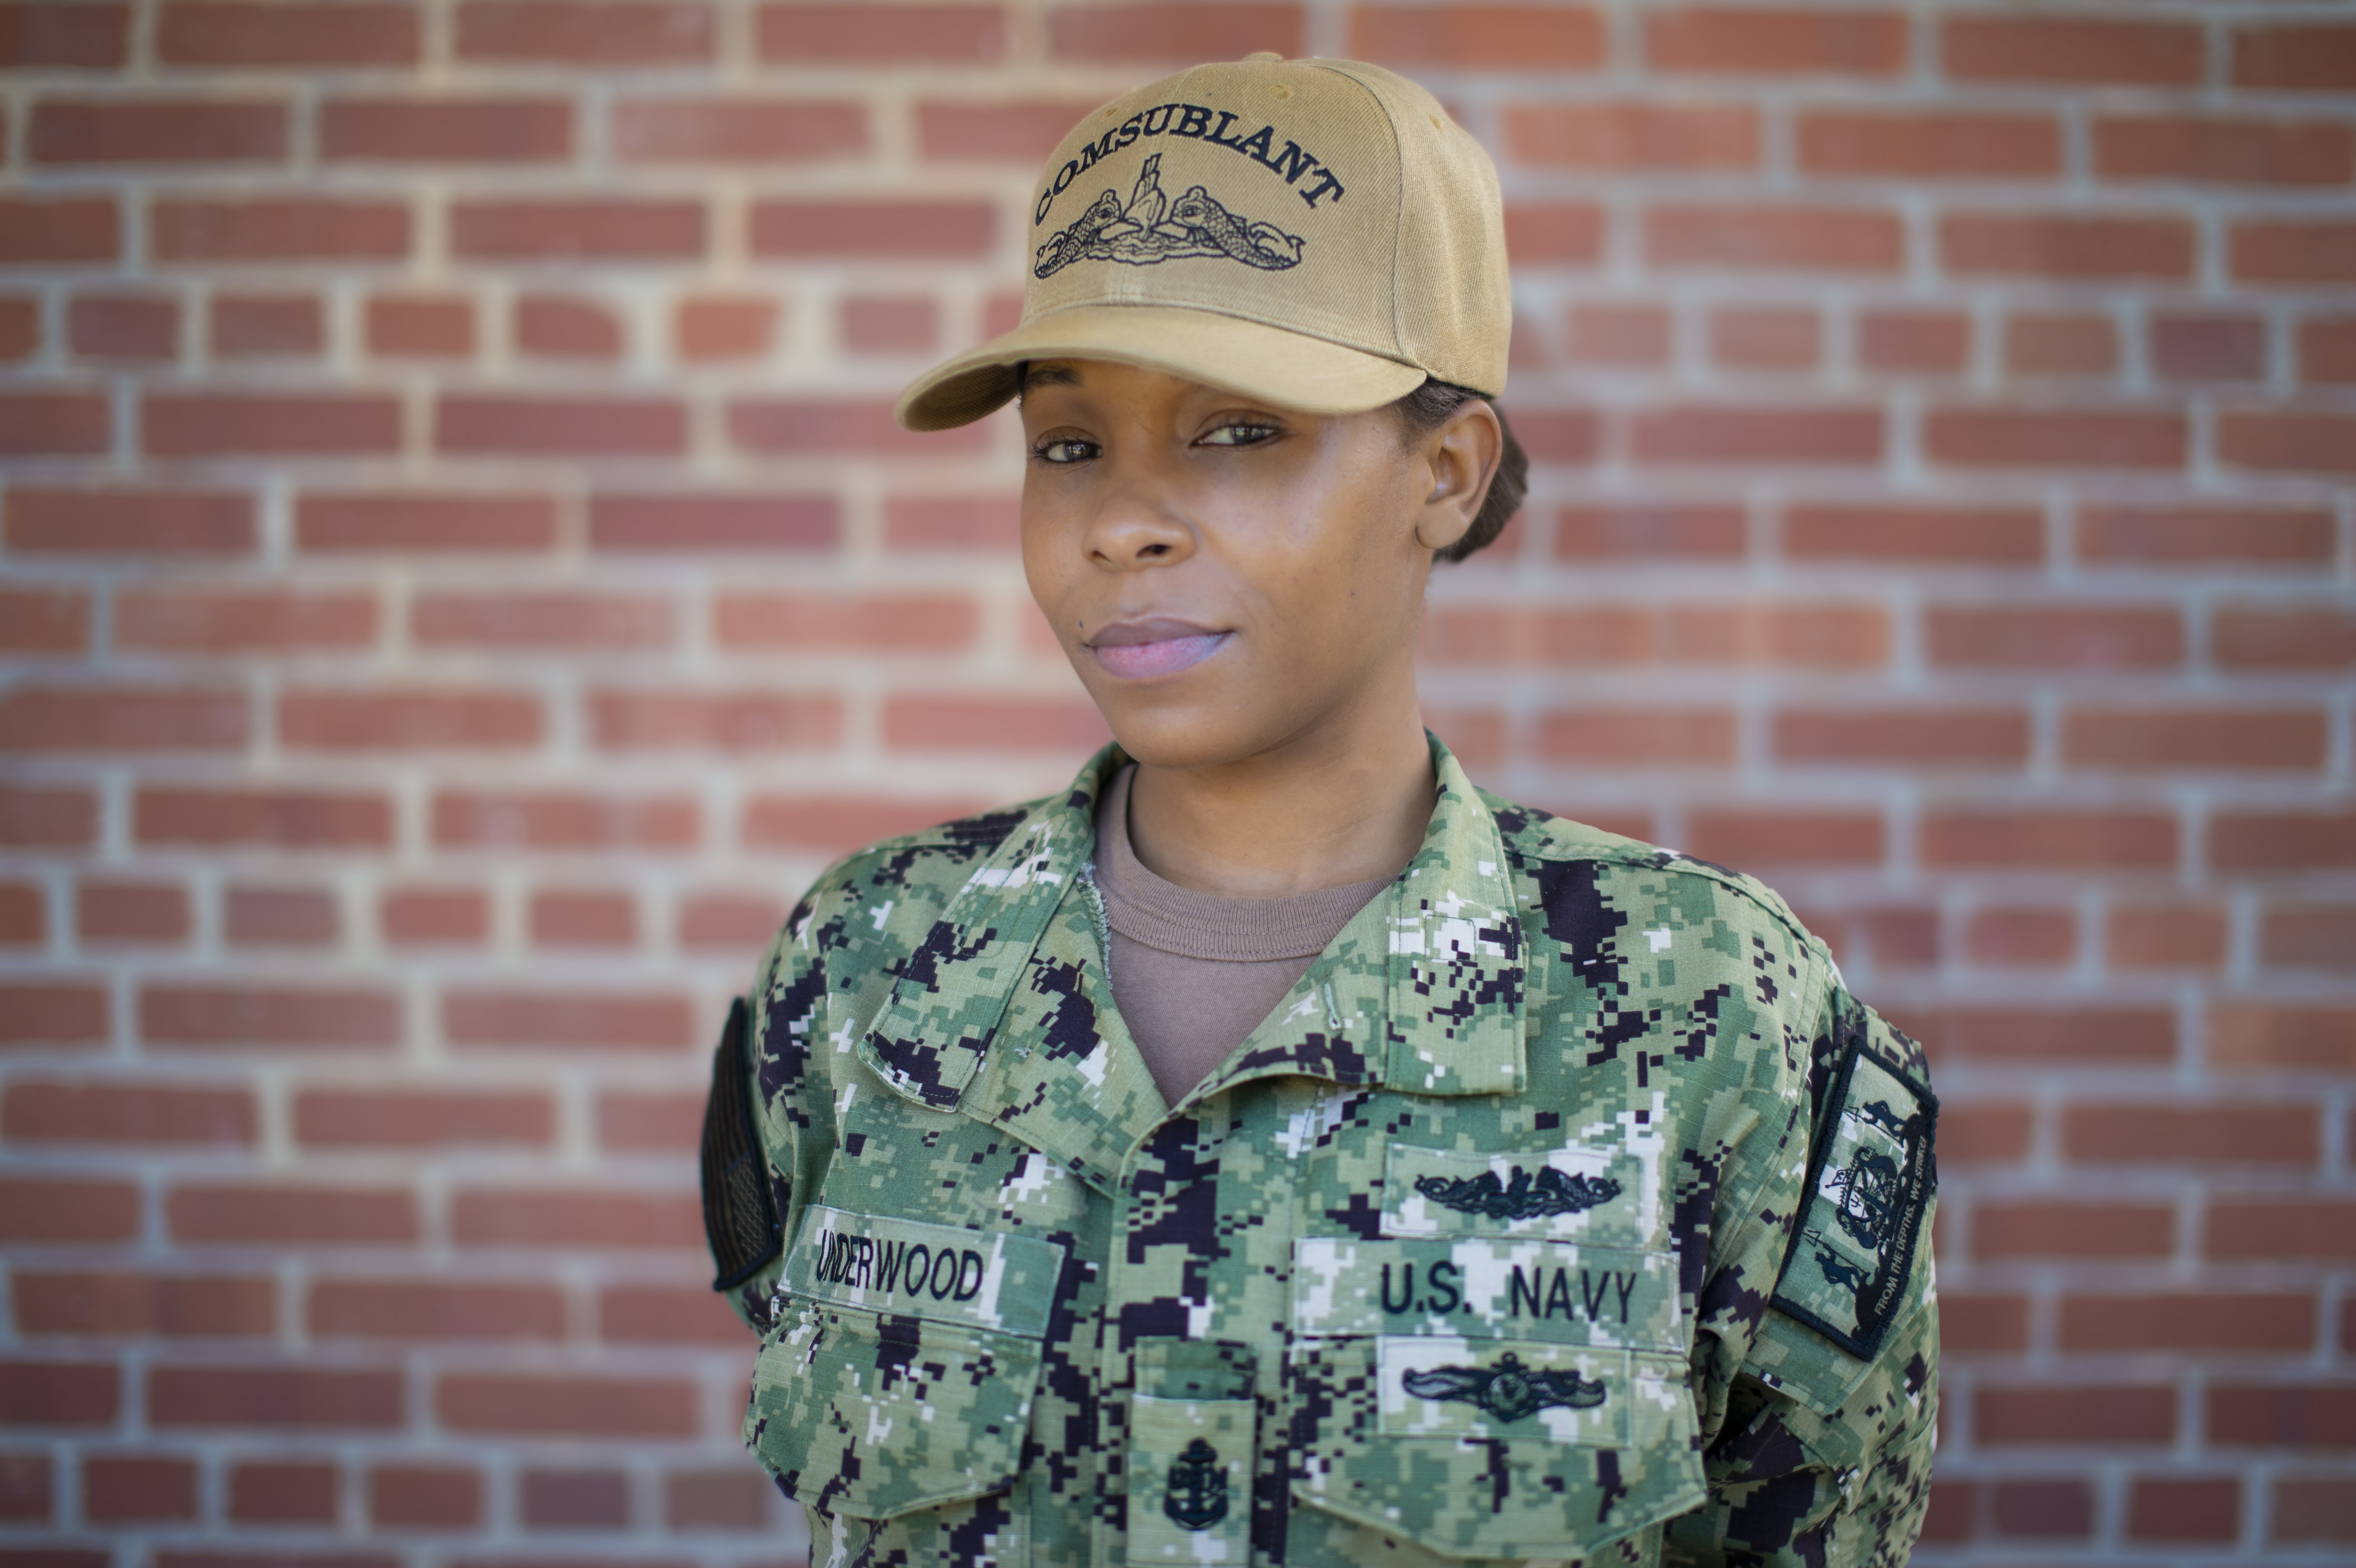 Chief Information Systems Technician (Submarine) Jasmine Underwood poses for a photo at Commander, Submarine Forces Atlantic, March 4, 2021. (